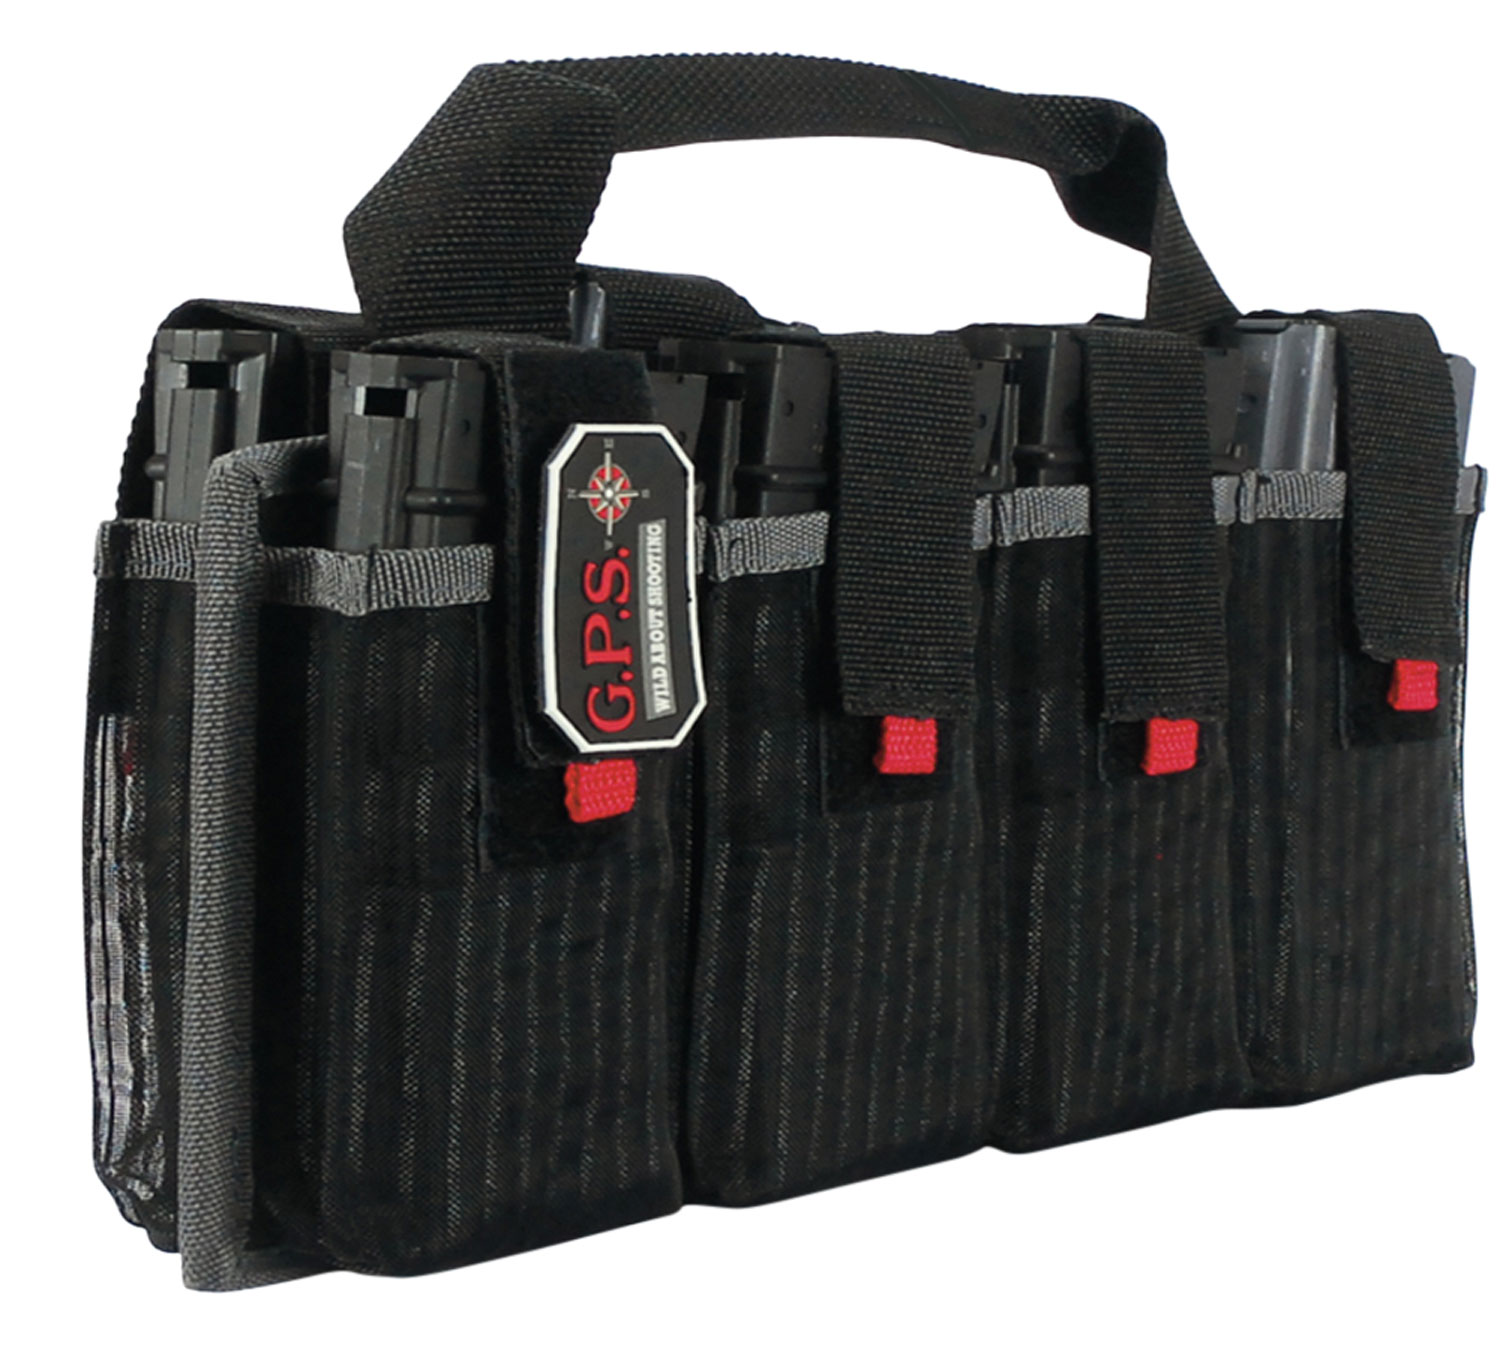 GPS AR MAGAZINE TOTE HOLDS 8-AR STYLE MAGS BLACK